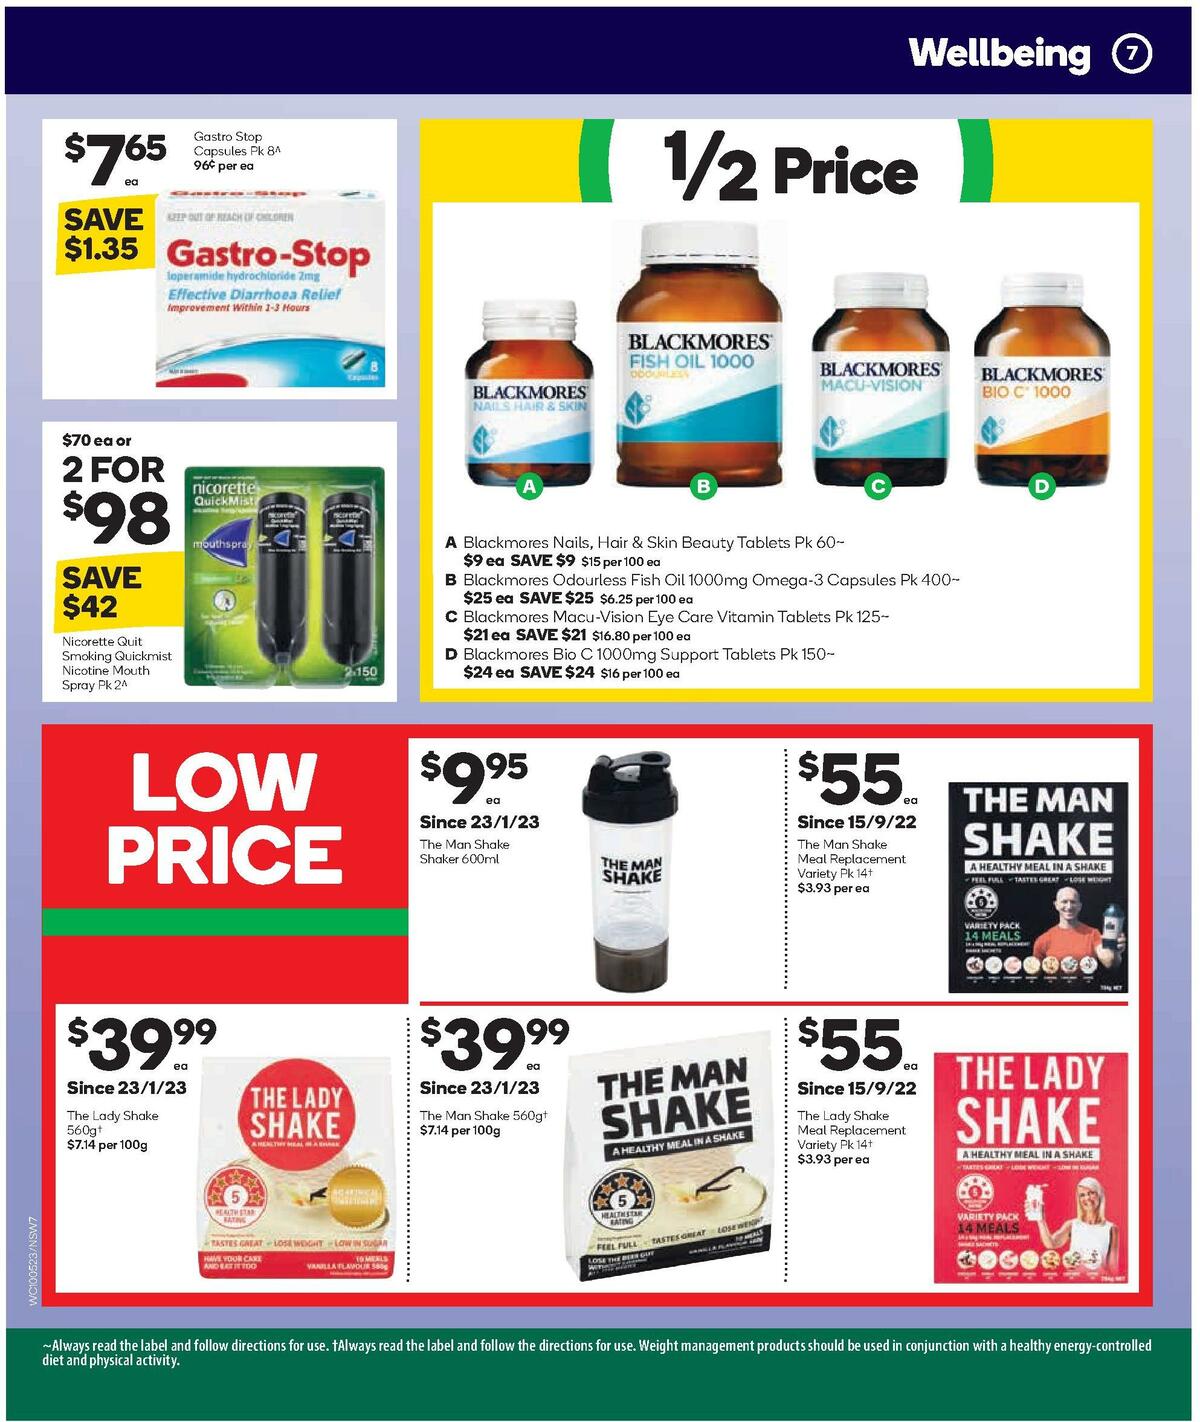 Woolworths Autumn Health & Beauty Catalogues from 10 May